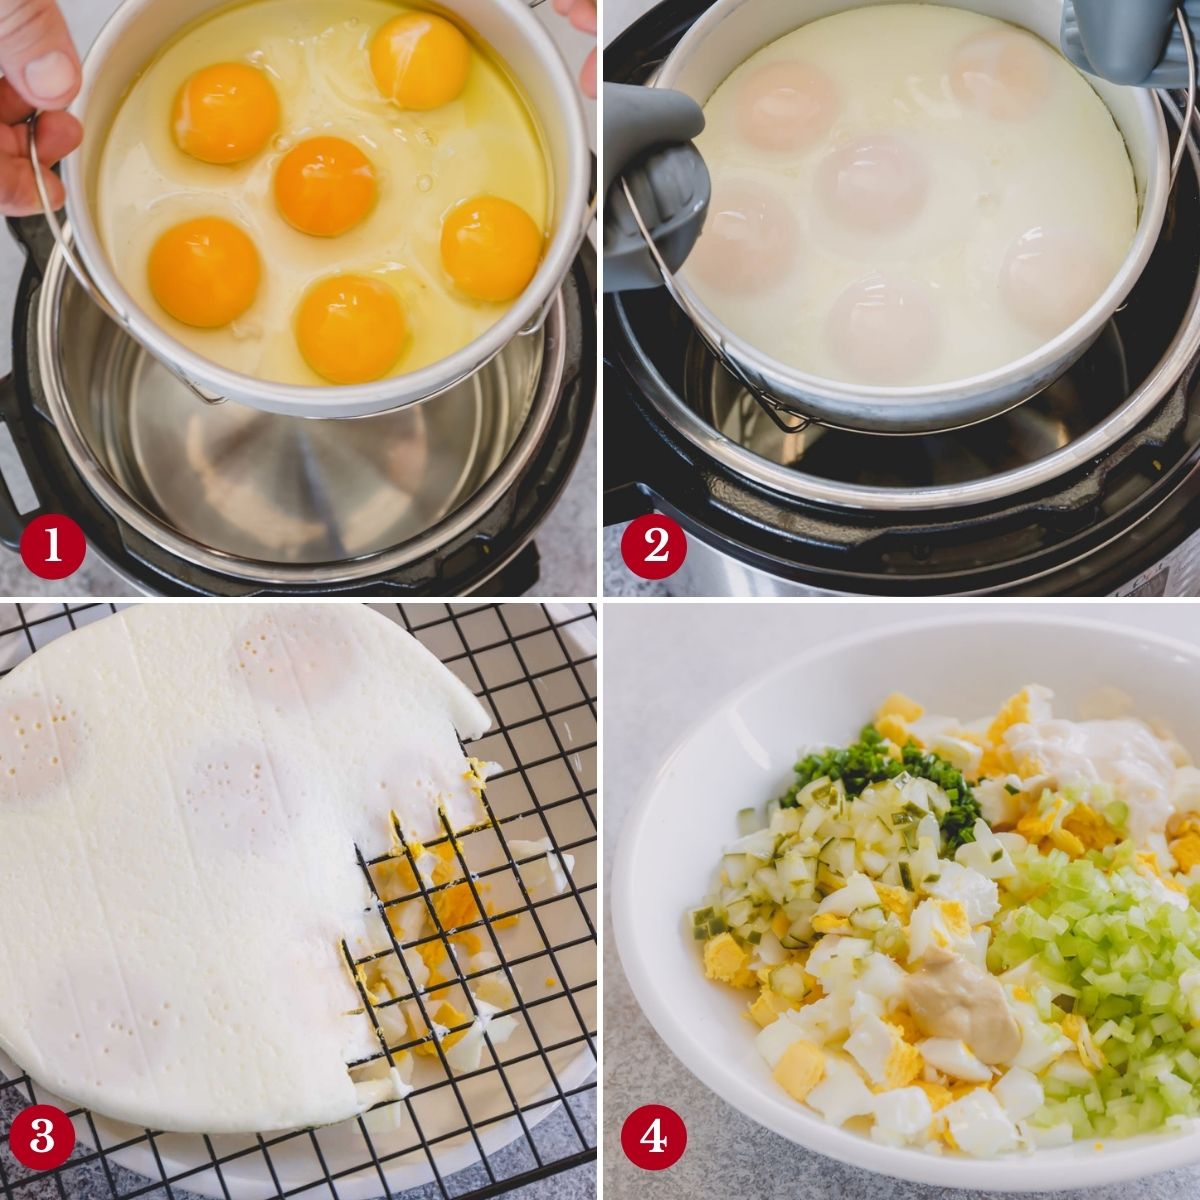 Step by step images of making egg salad in an Instant Pot.